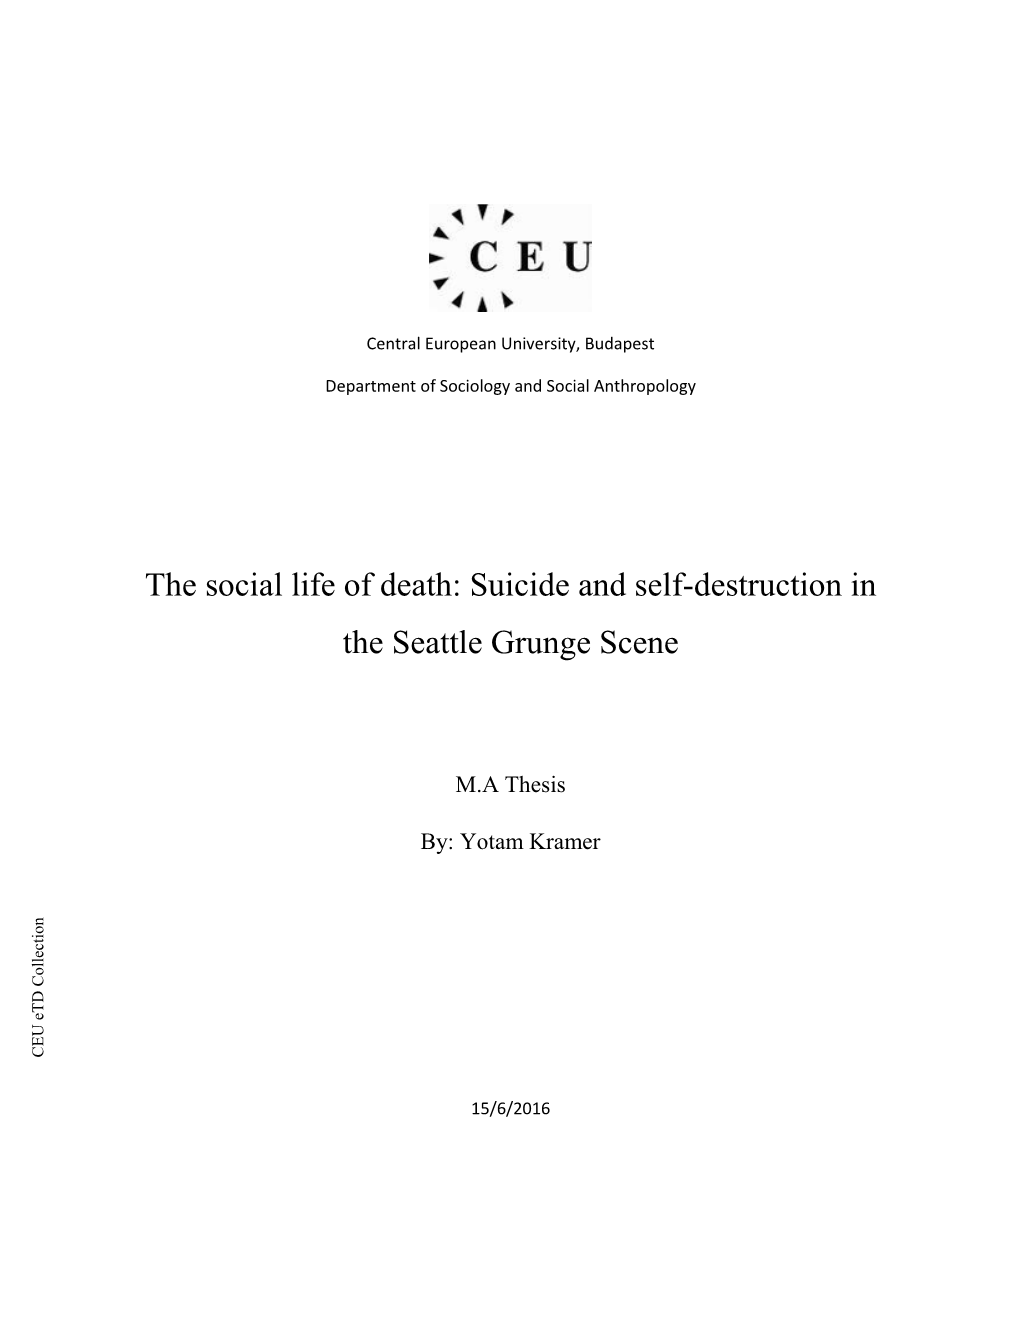 Suicide and Self-Destruction in the Seattle Grunge Scene